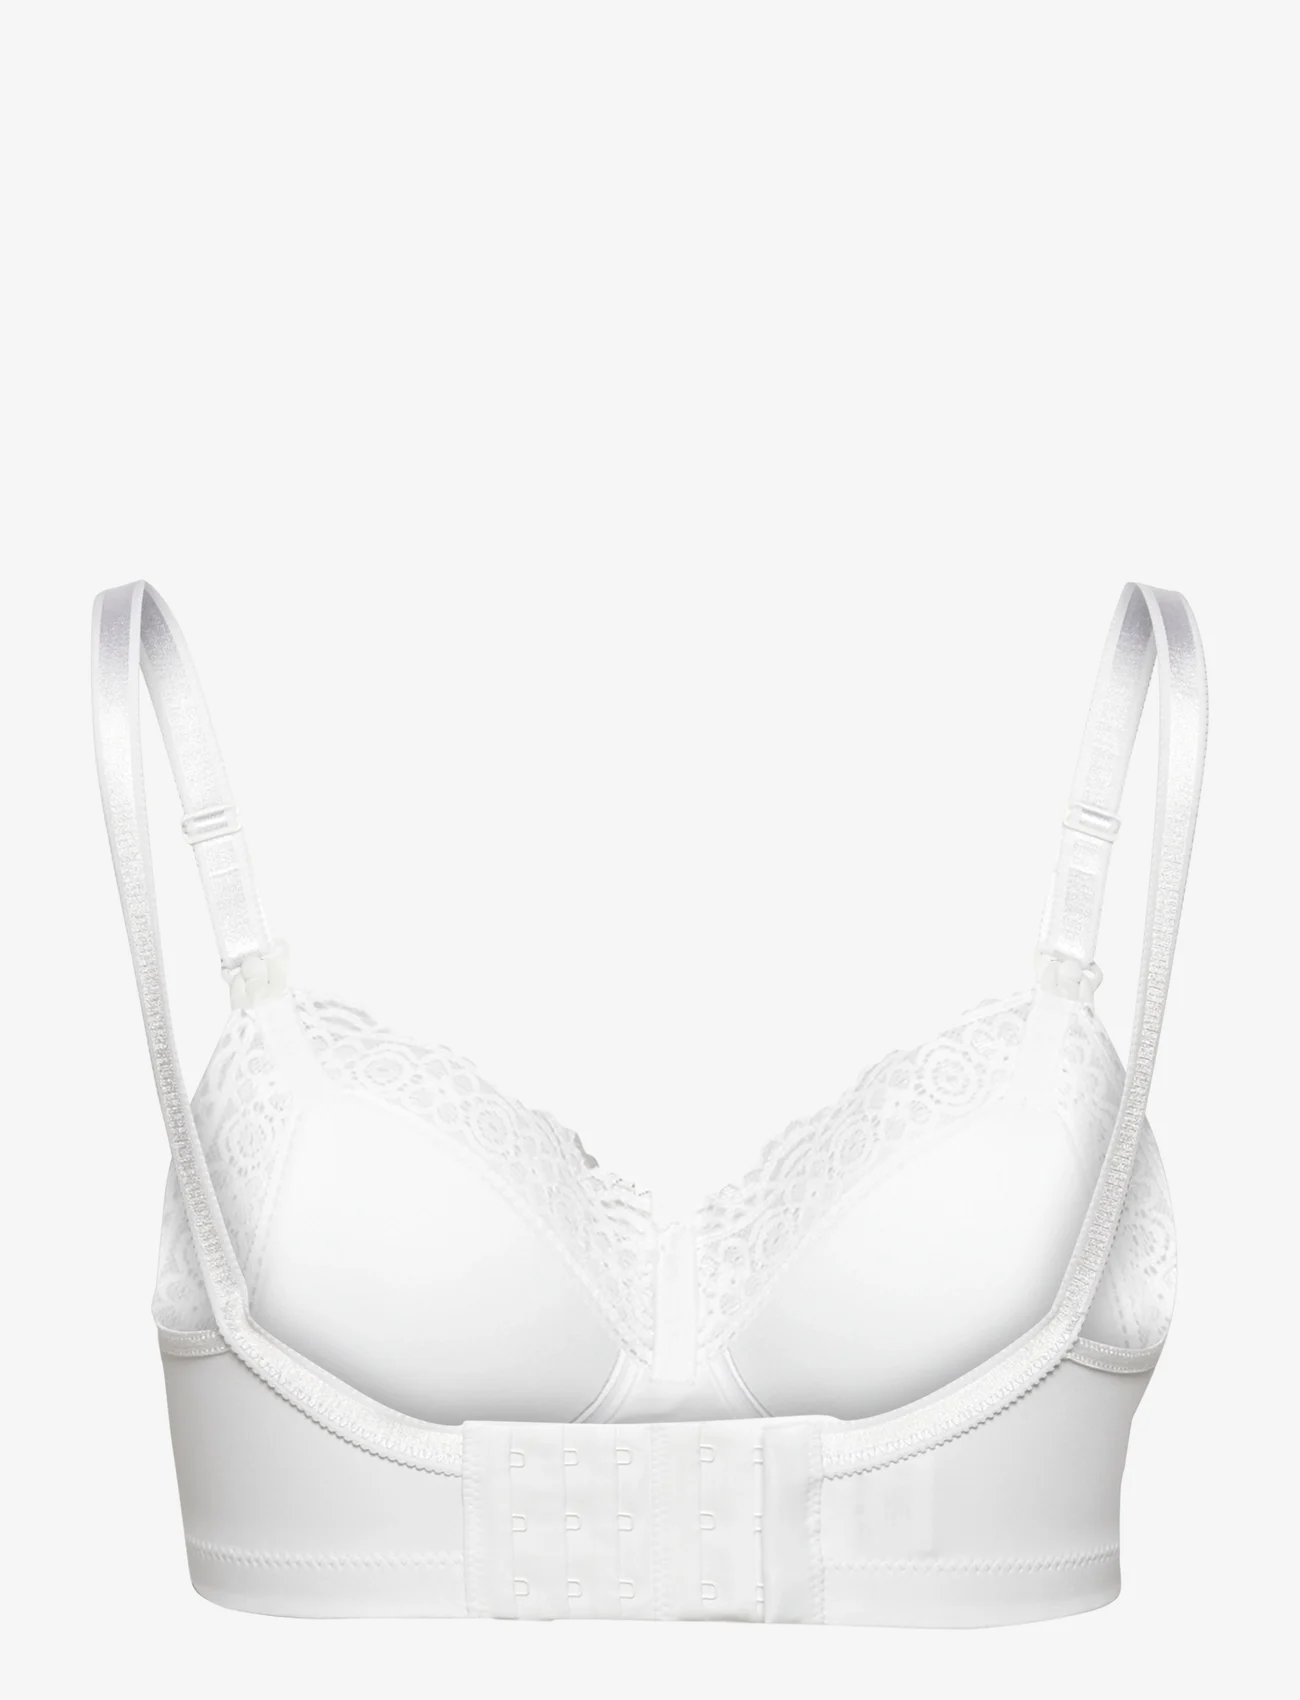 Abecita - MAMA Nursing Bra padded moulded cups white - amme bh'er - white - 1